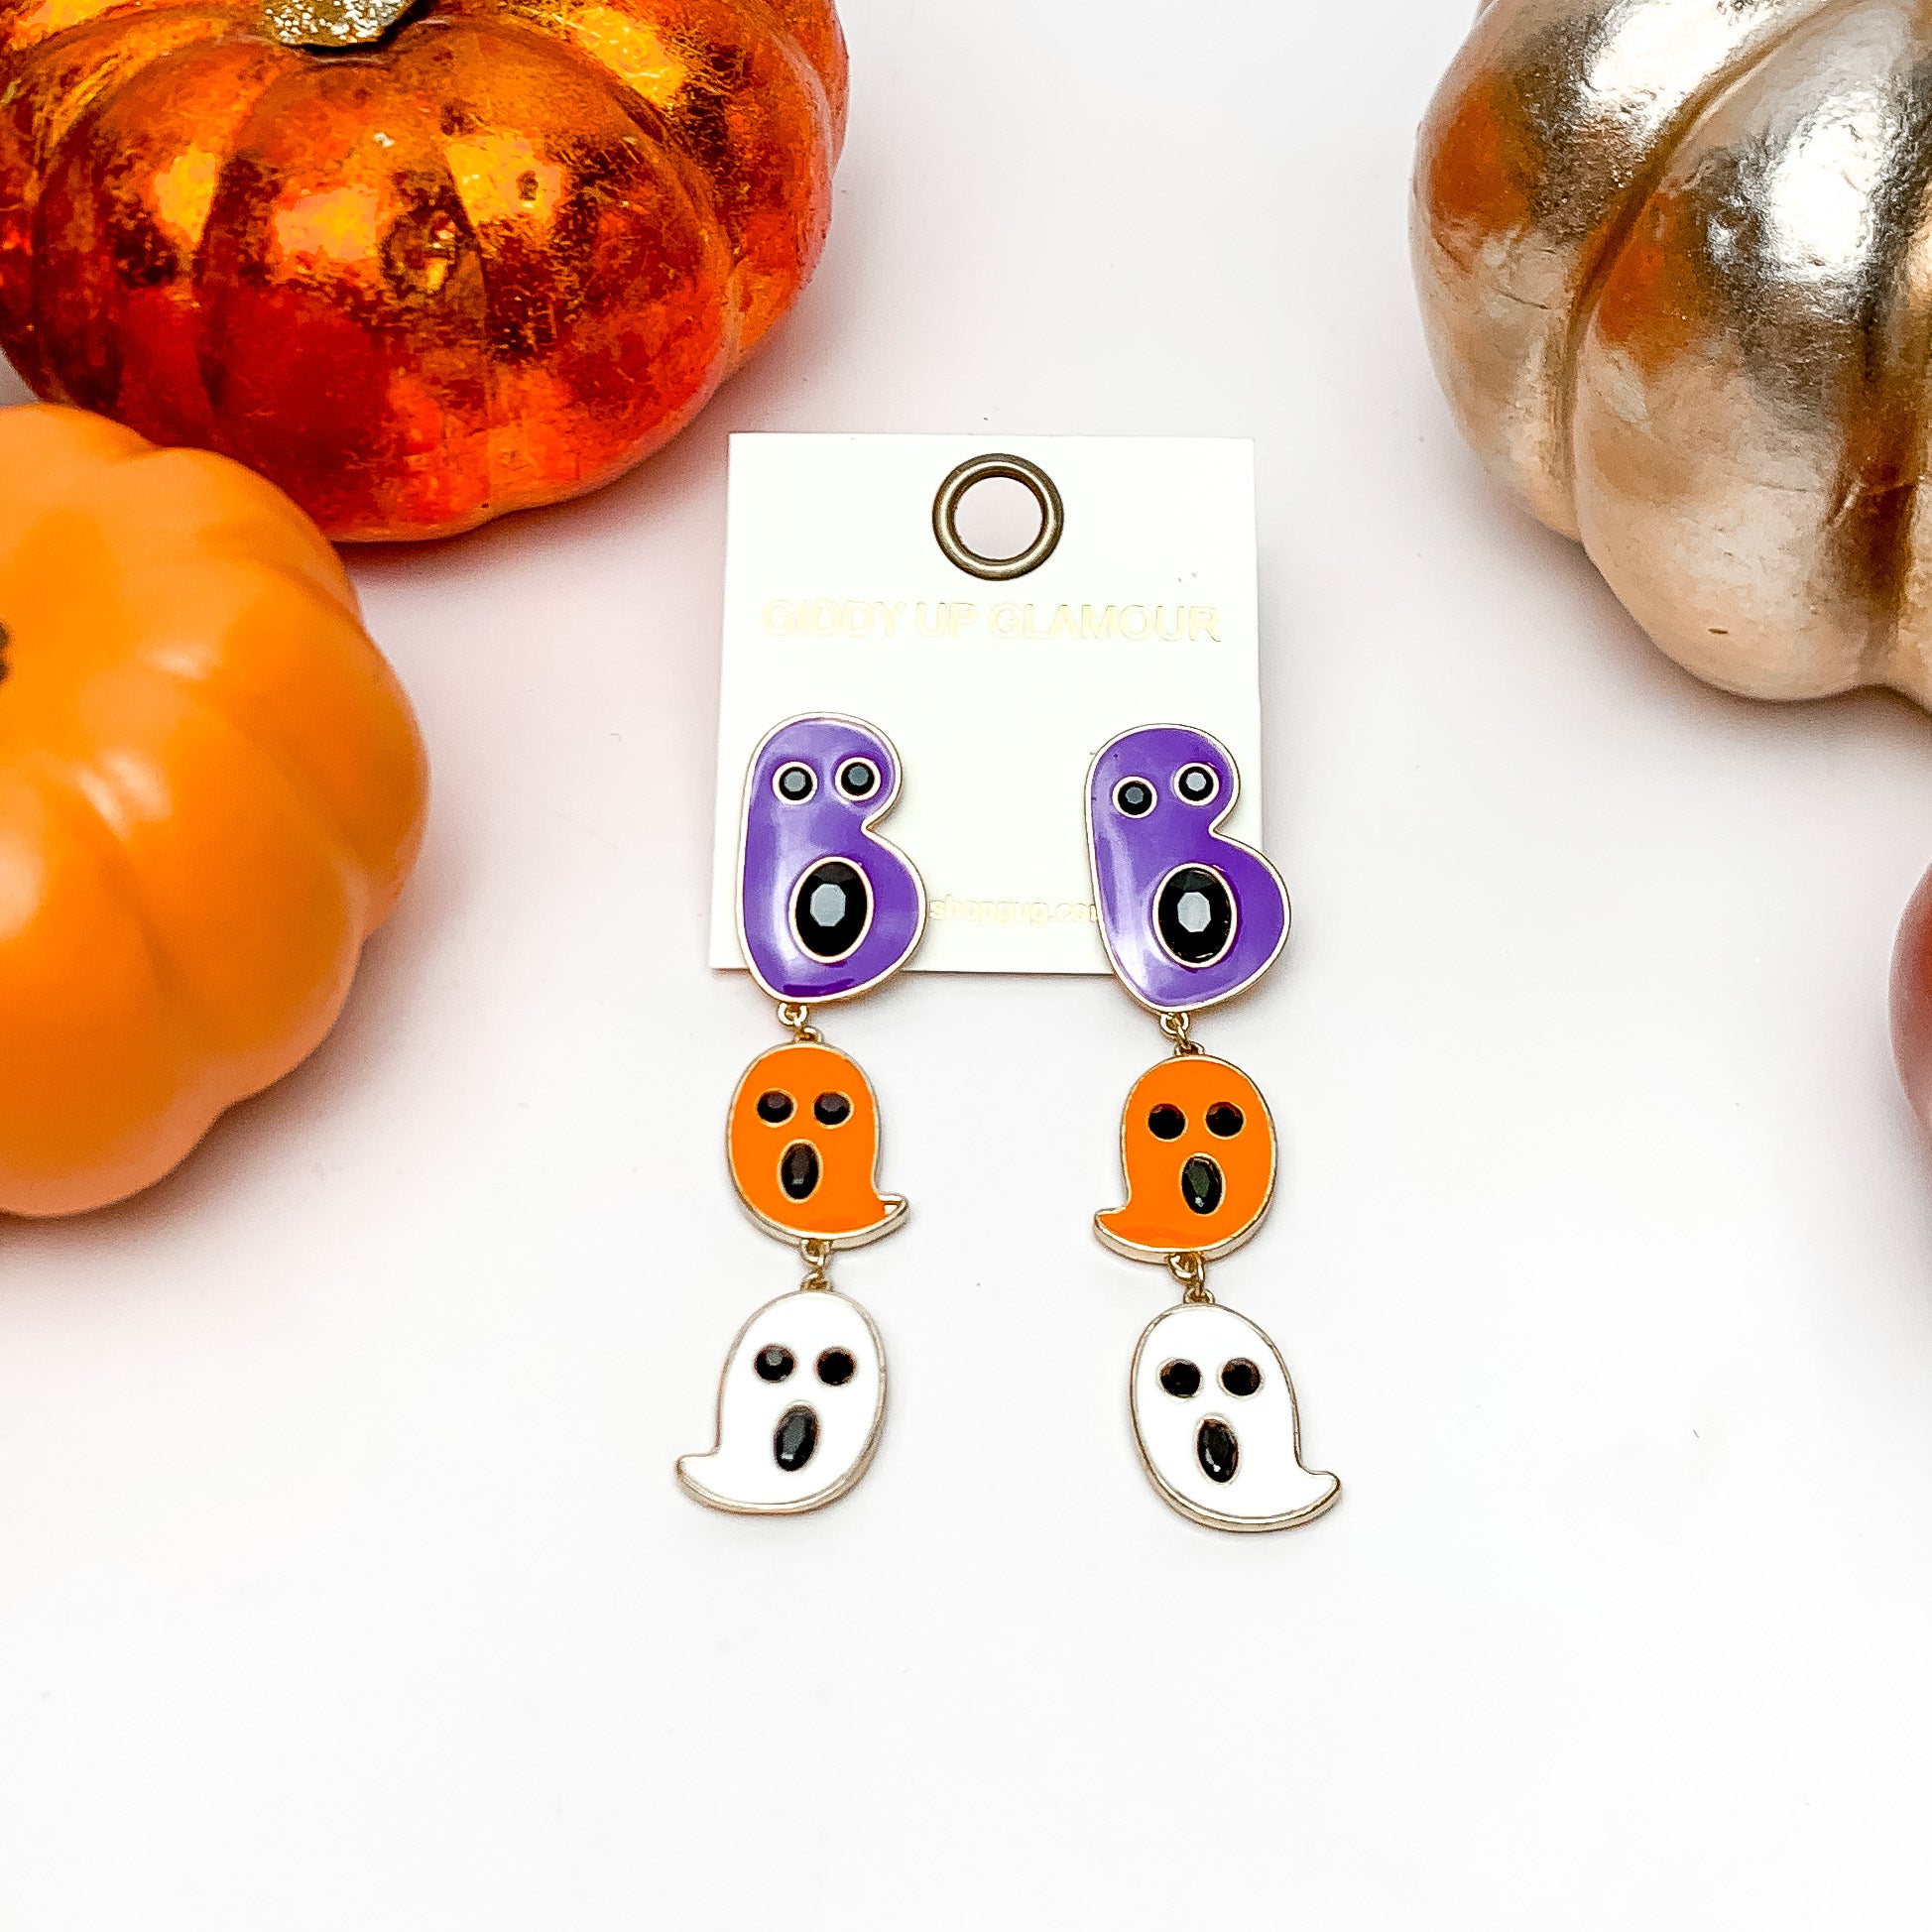 Ghost Drop Post Earrings with Black Crystals in Purple, Orange, and White. These earrings are on a white background with orange and silver pumpkins around them.